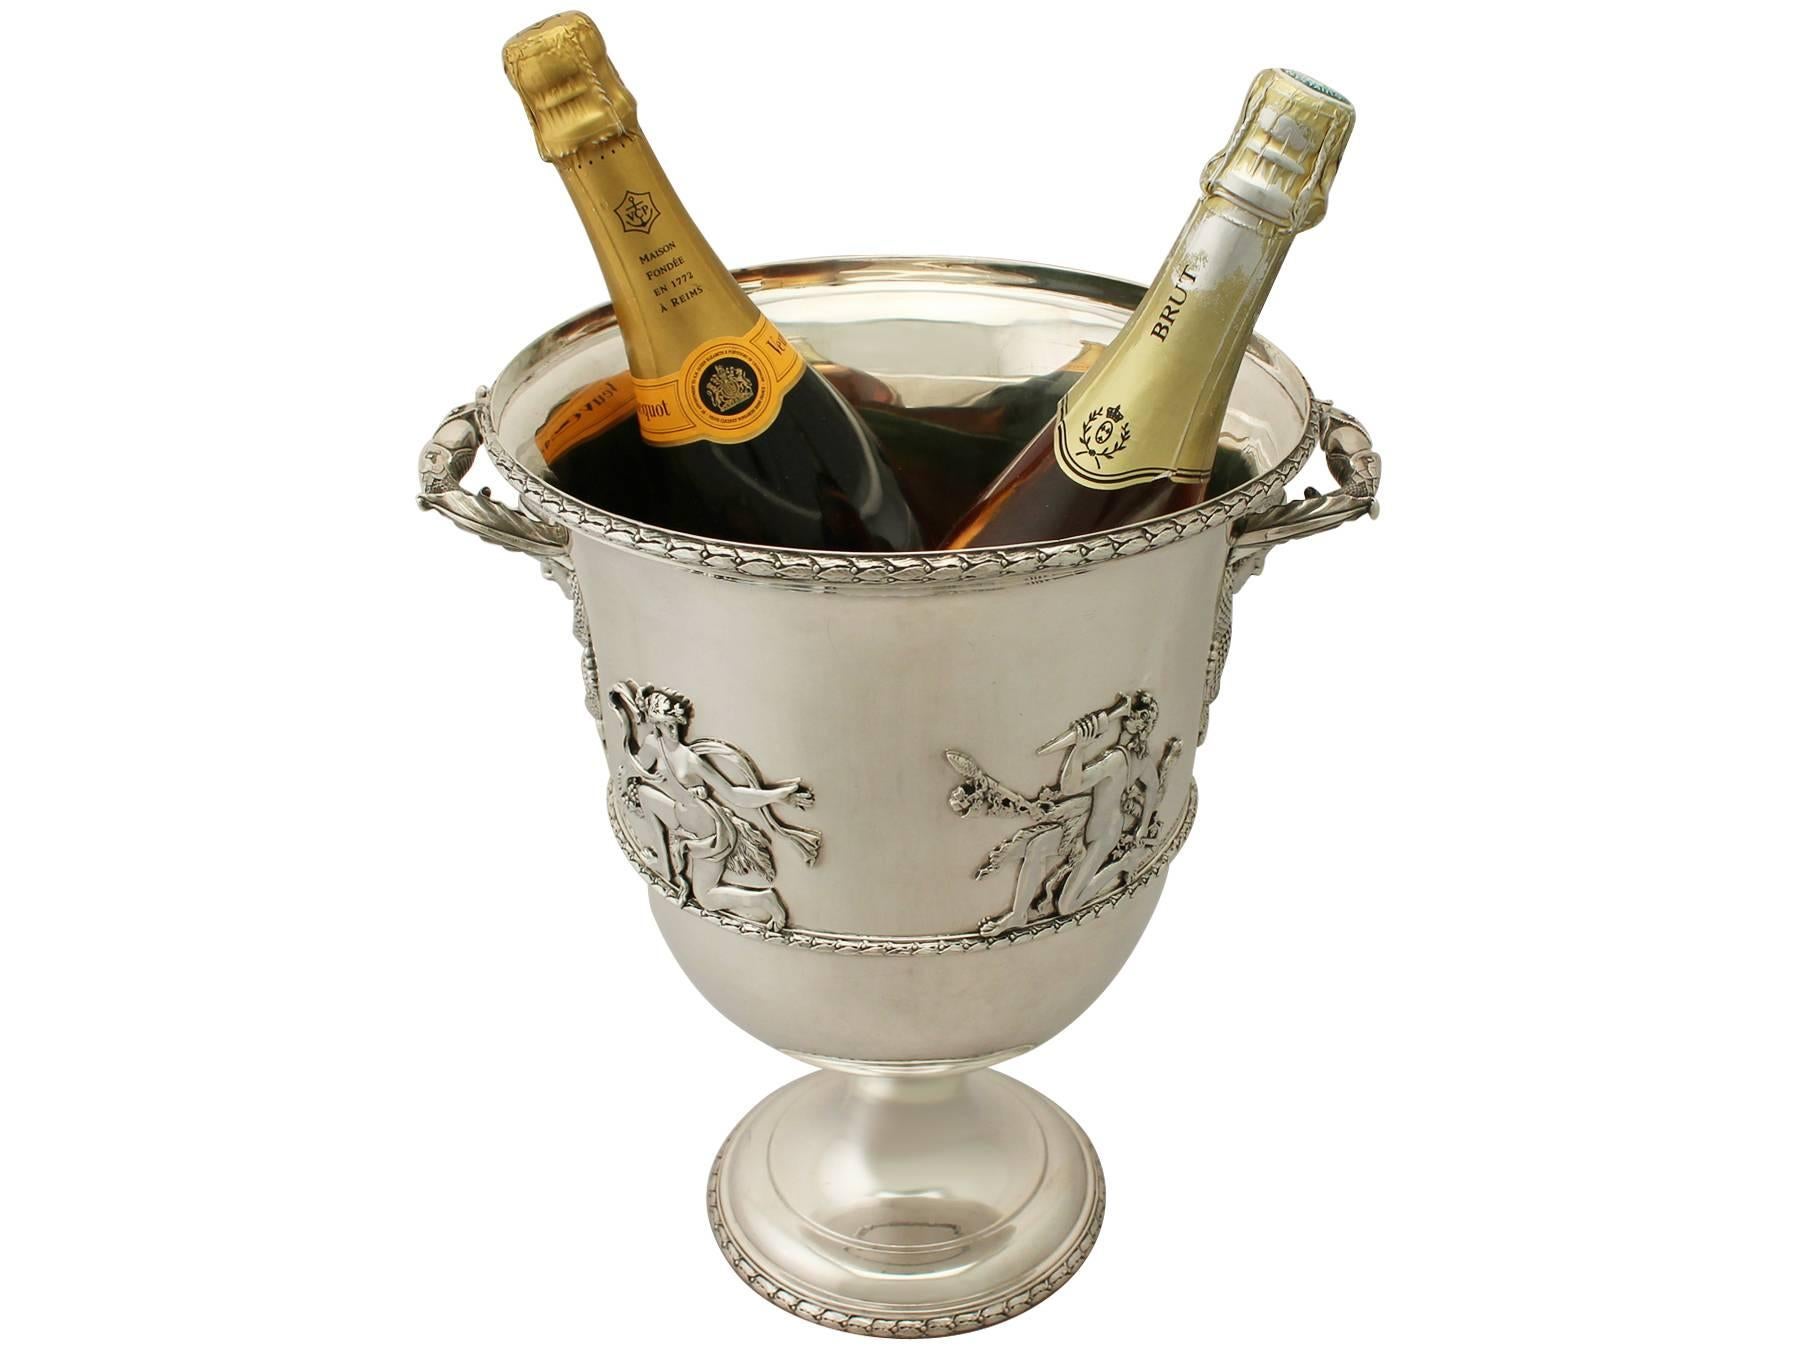 A magnificent, fine and impressive, large antique Edwardian English sterling silver wine/champagne cooler made by Charles Stuart Harris; an addition to our presentation silverware collection

This magnificent antique Edwardian sterling silver